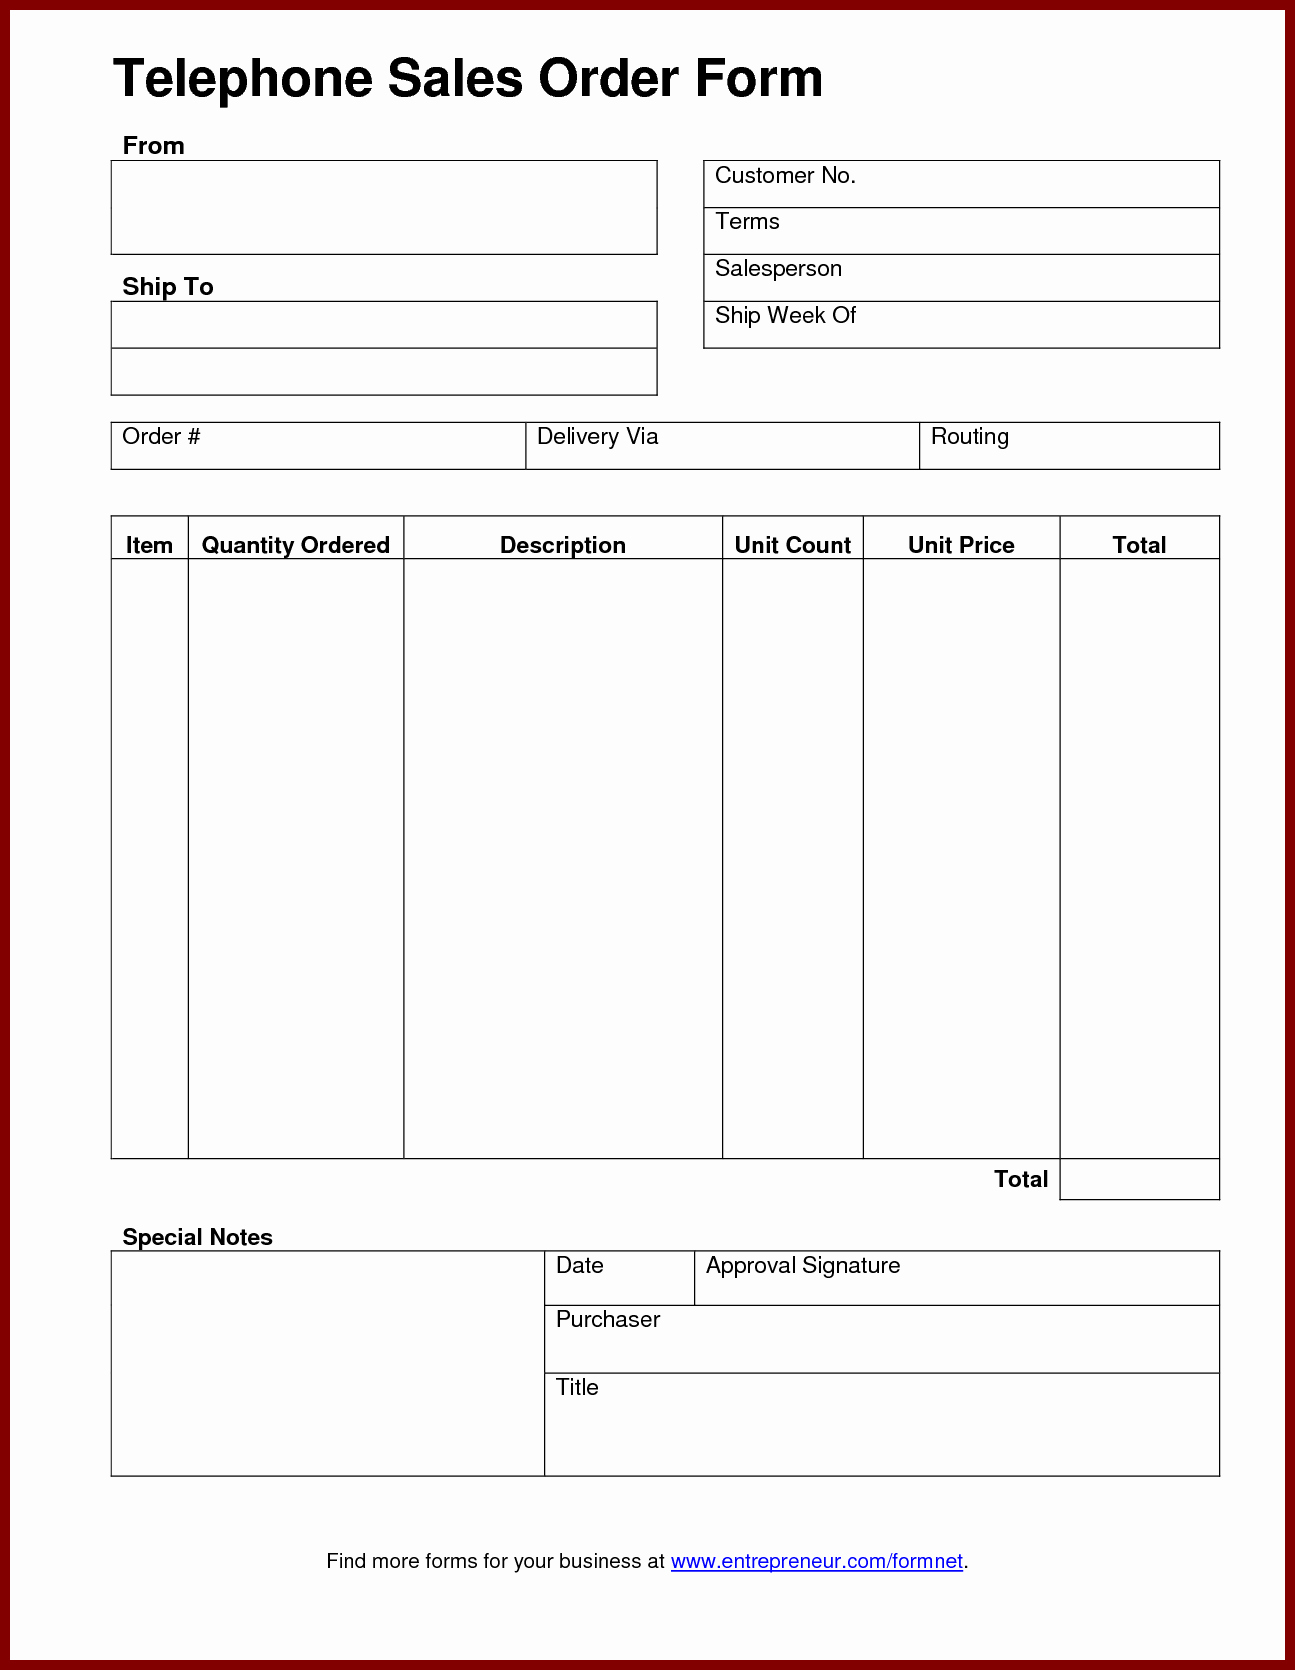 Sales order form Templates Free Fresh Delivery order Template Bamboodownunder